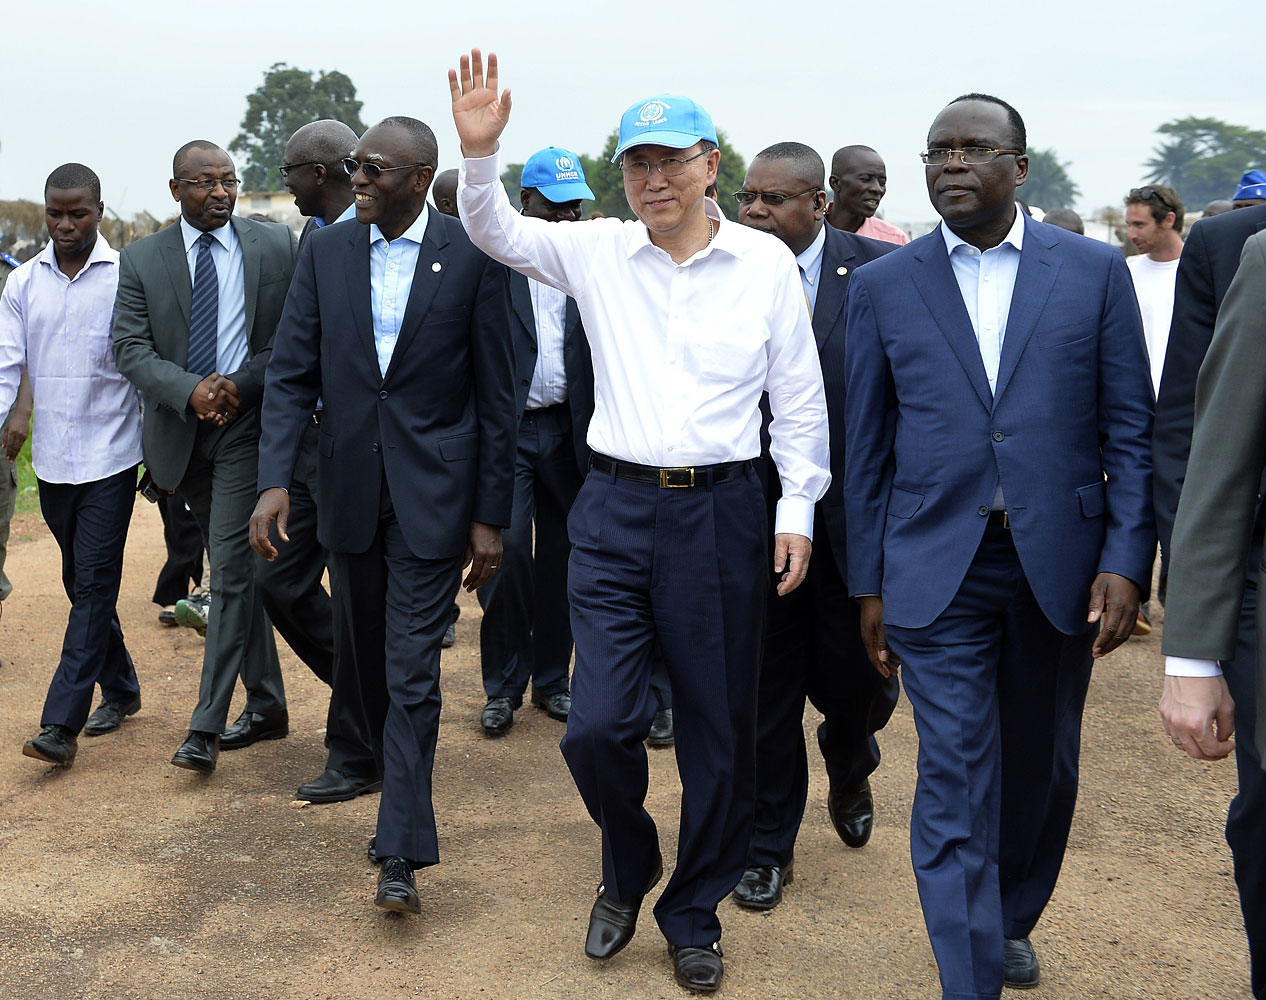 U.N. Secretary-General Ban Ki-moon waves as he visits a camp for internally displaced persons in the Central African Republic on April 5, 2014 (Miguel Medina—AFP/Getty Images)